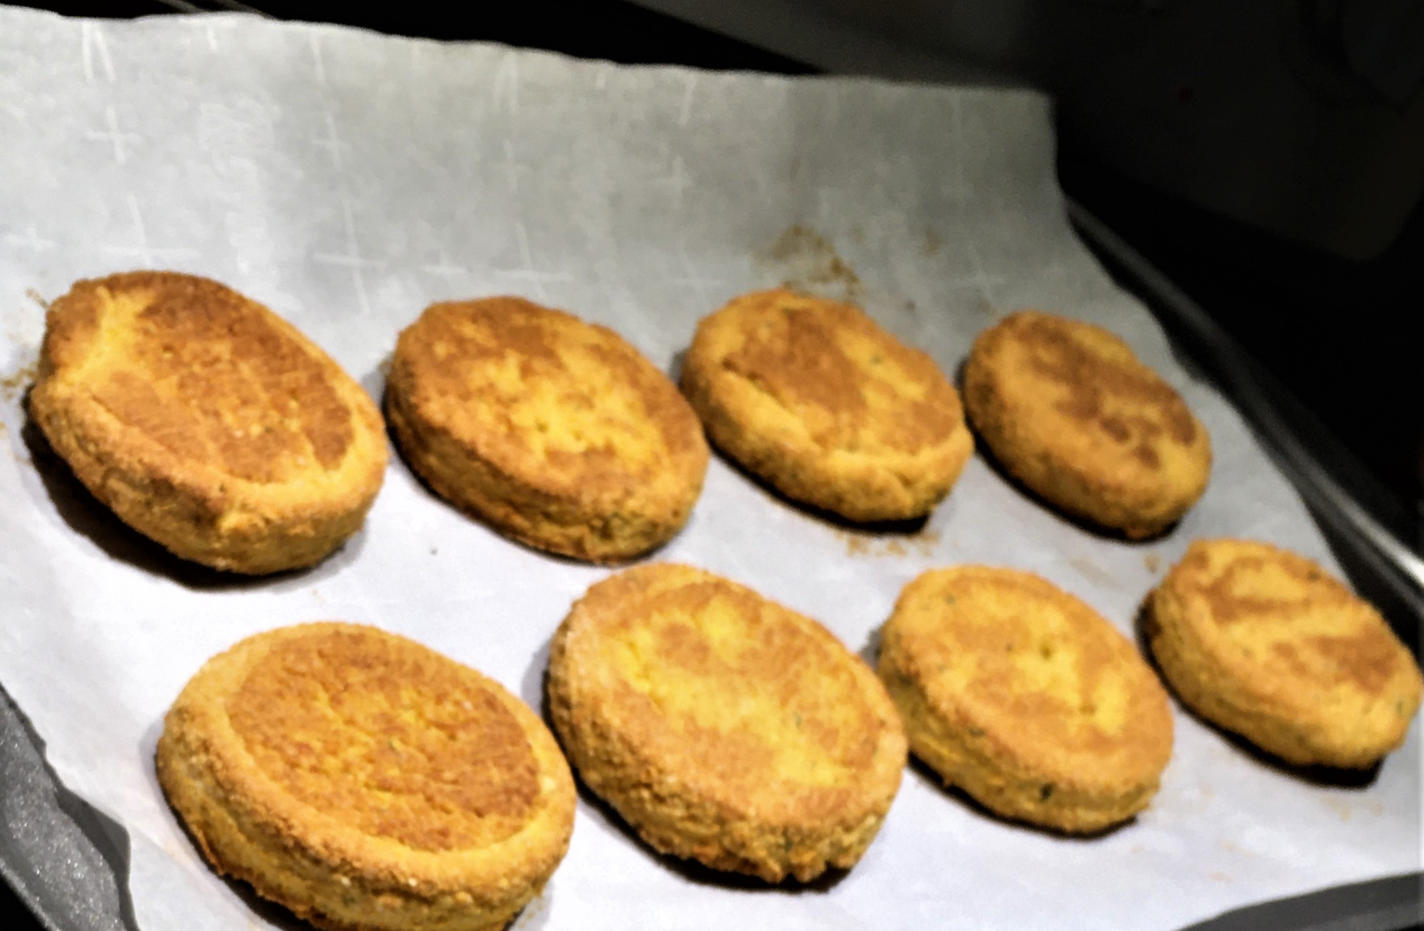 A tray of 8 pumpkin biscuits.